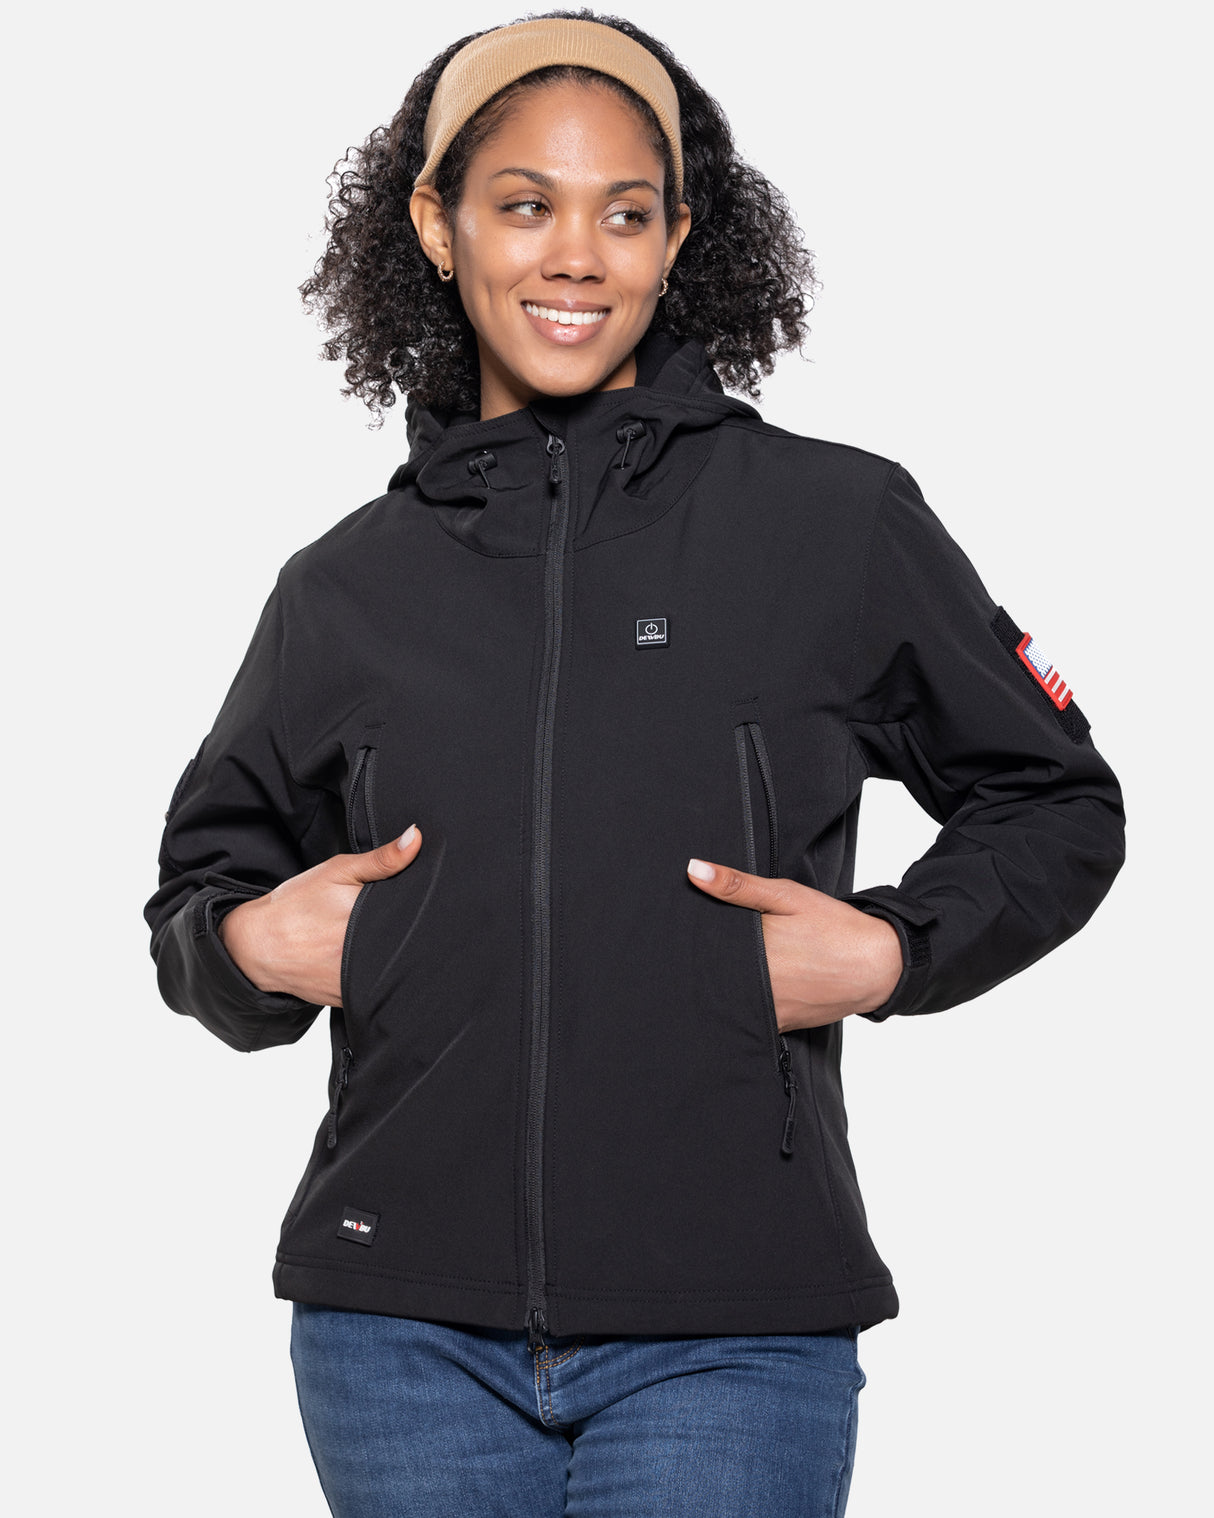 Can a soft shell provide heavy-duty warmth?